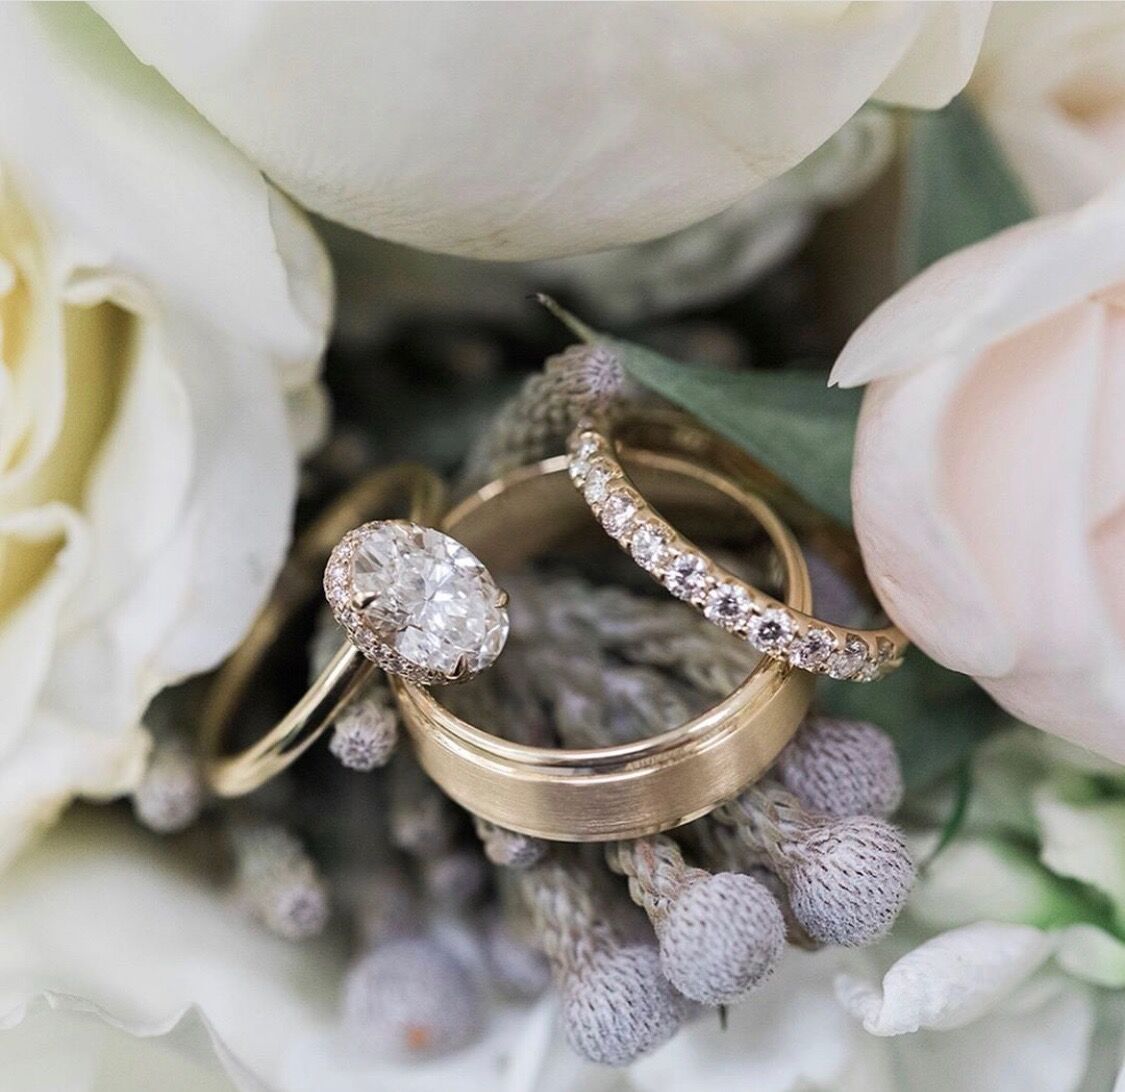 Dimend SCAASI | Jewelers - The Knot